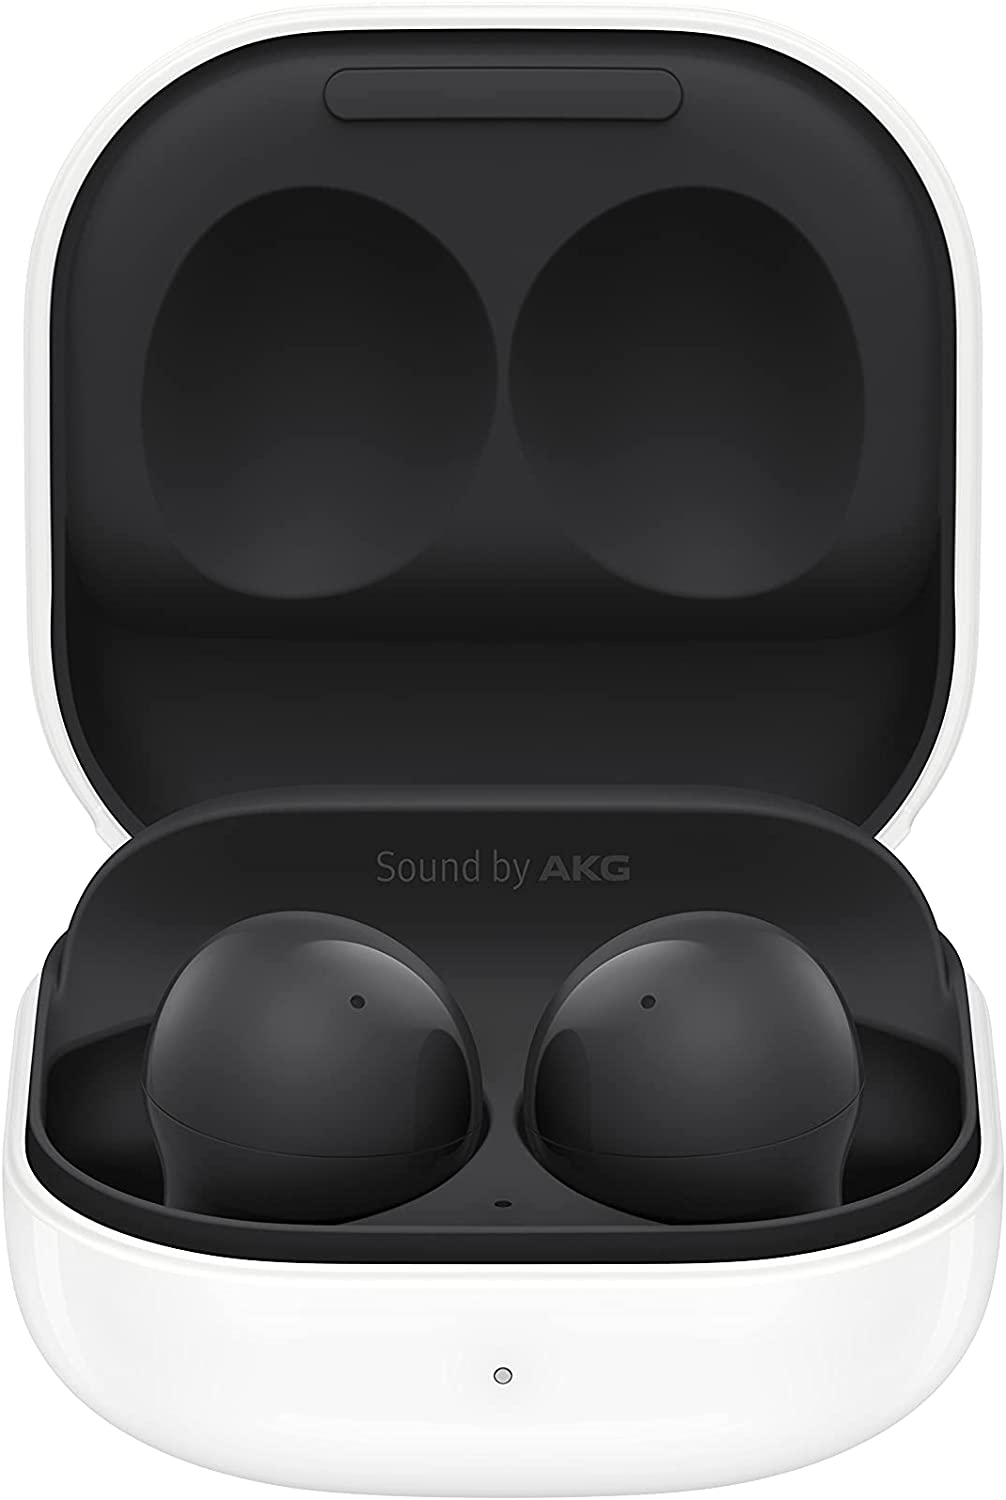 Samsung Galaxy Buds2 True Wireless Noise Cancelling Bluetooth Earbuds - Graphite (Refurbished)